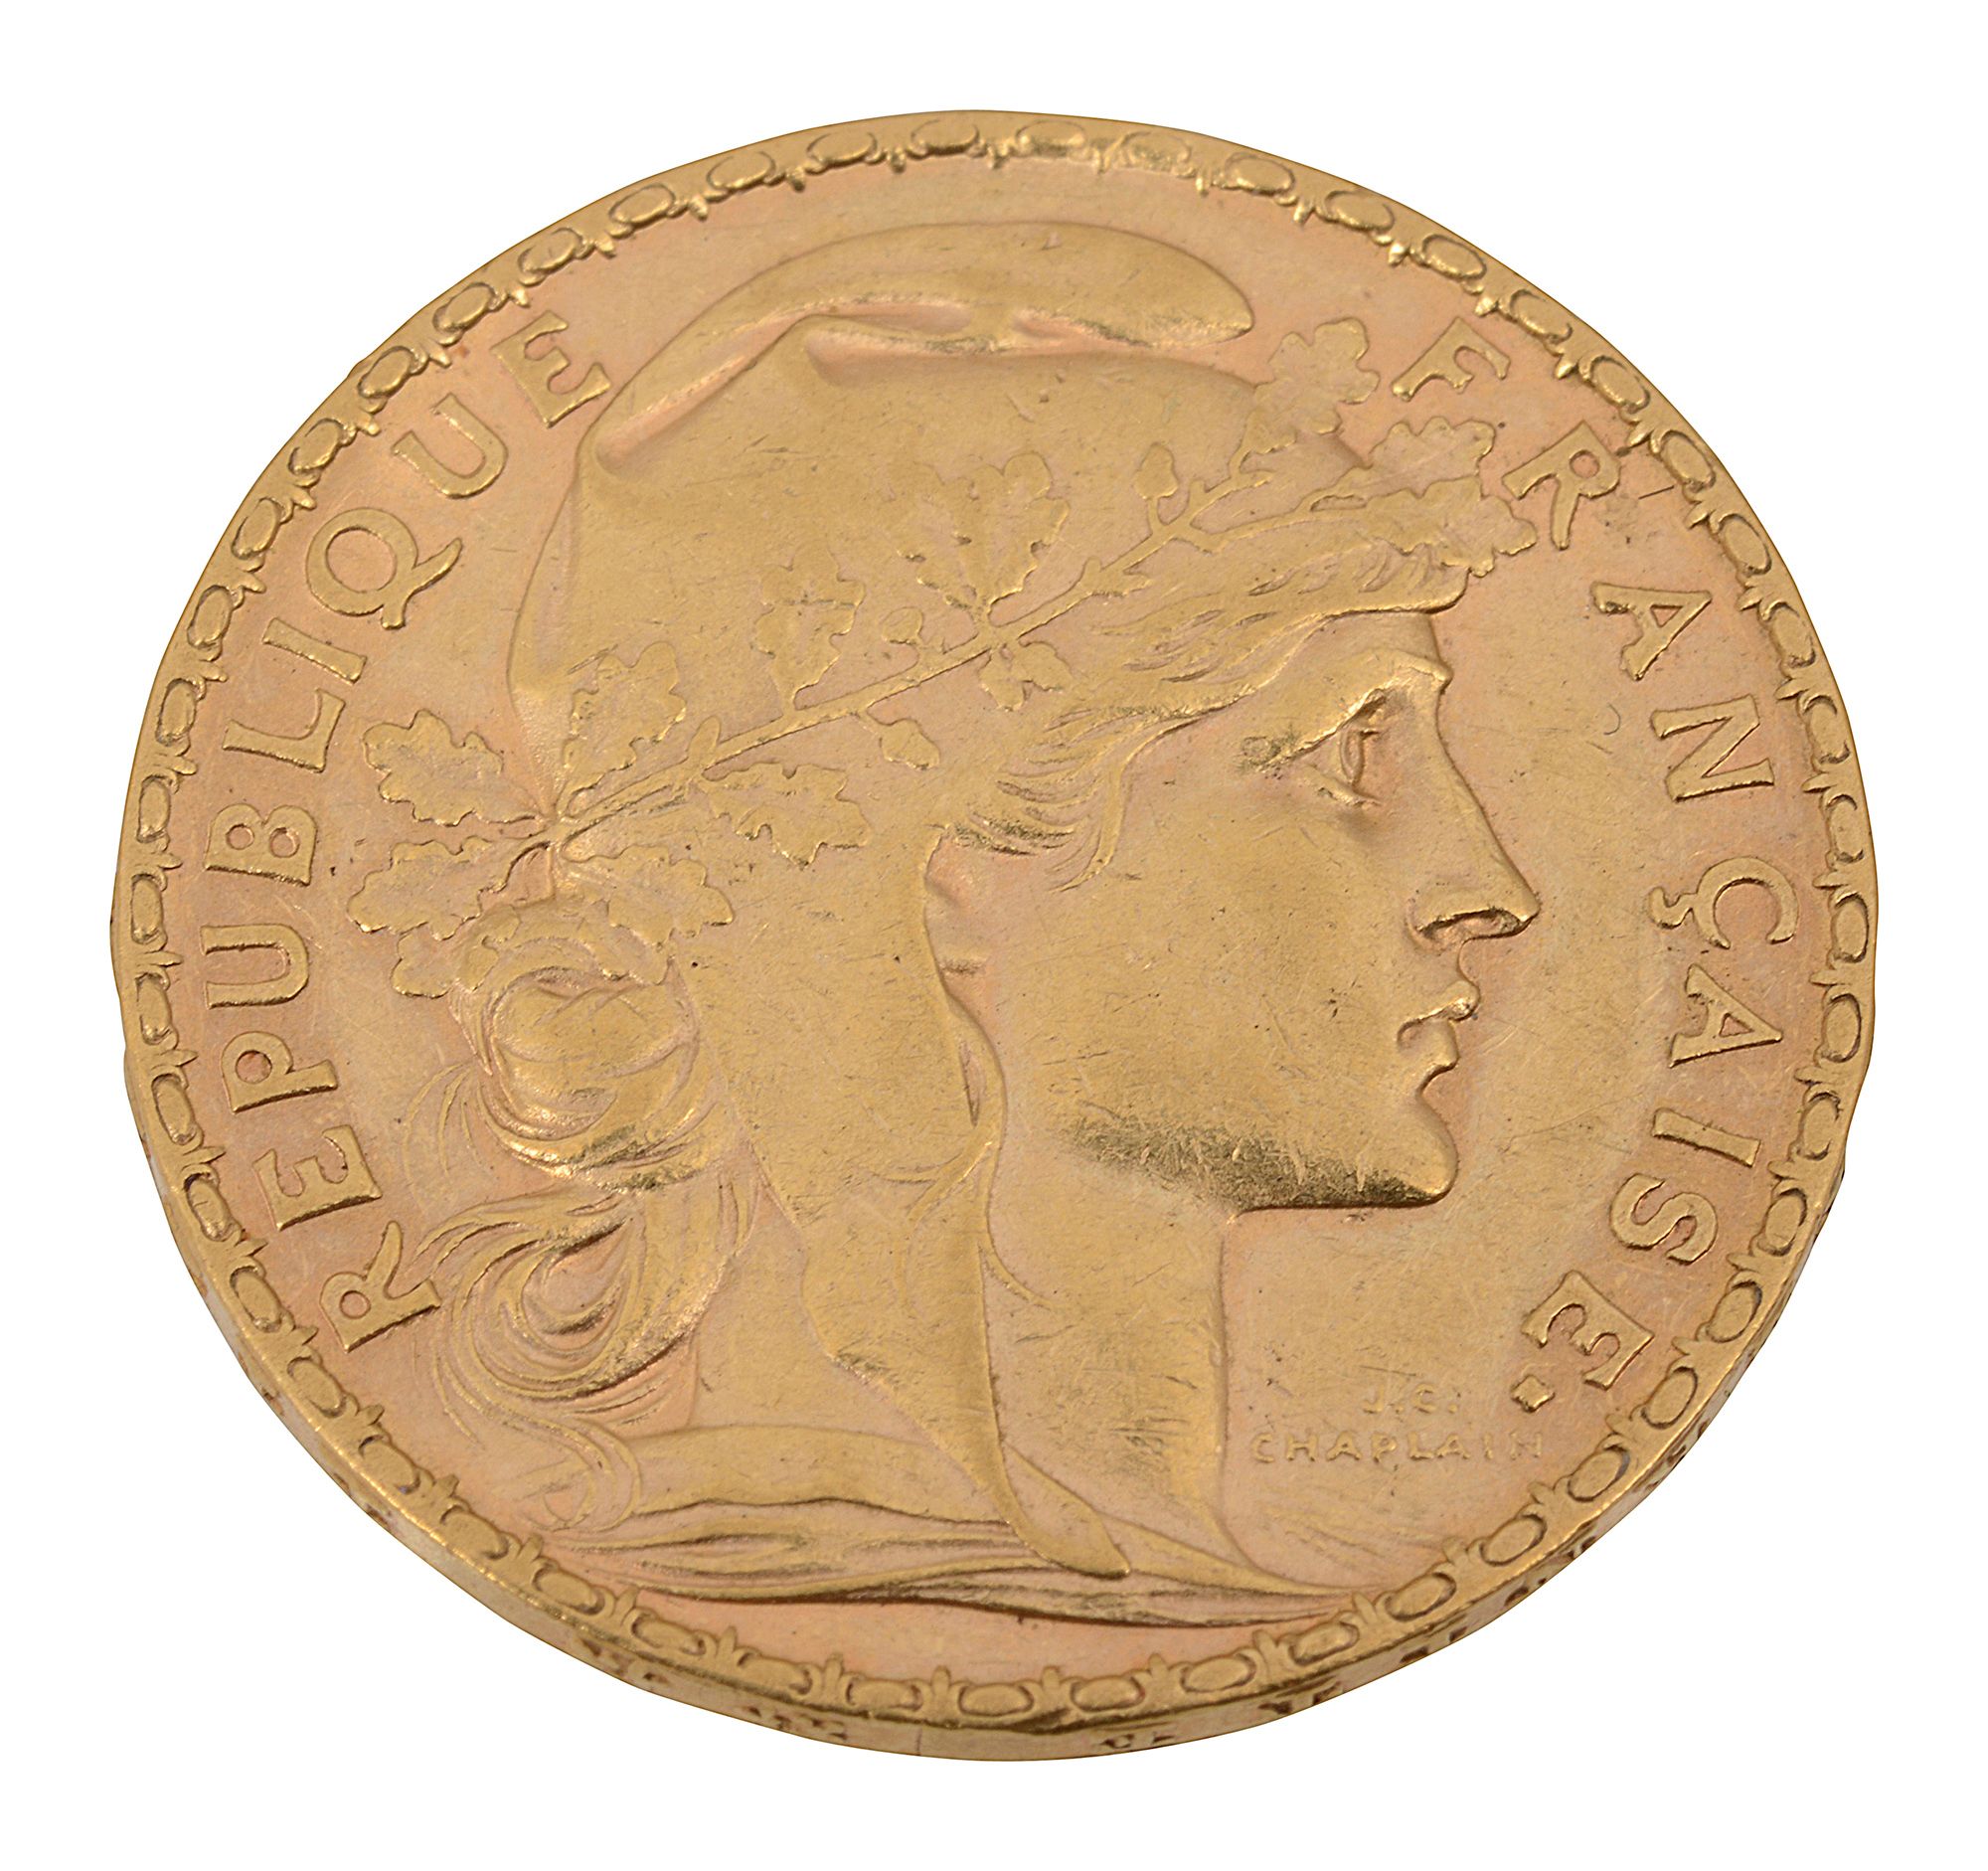 A French 20 franc gold coin